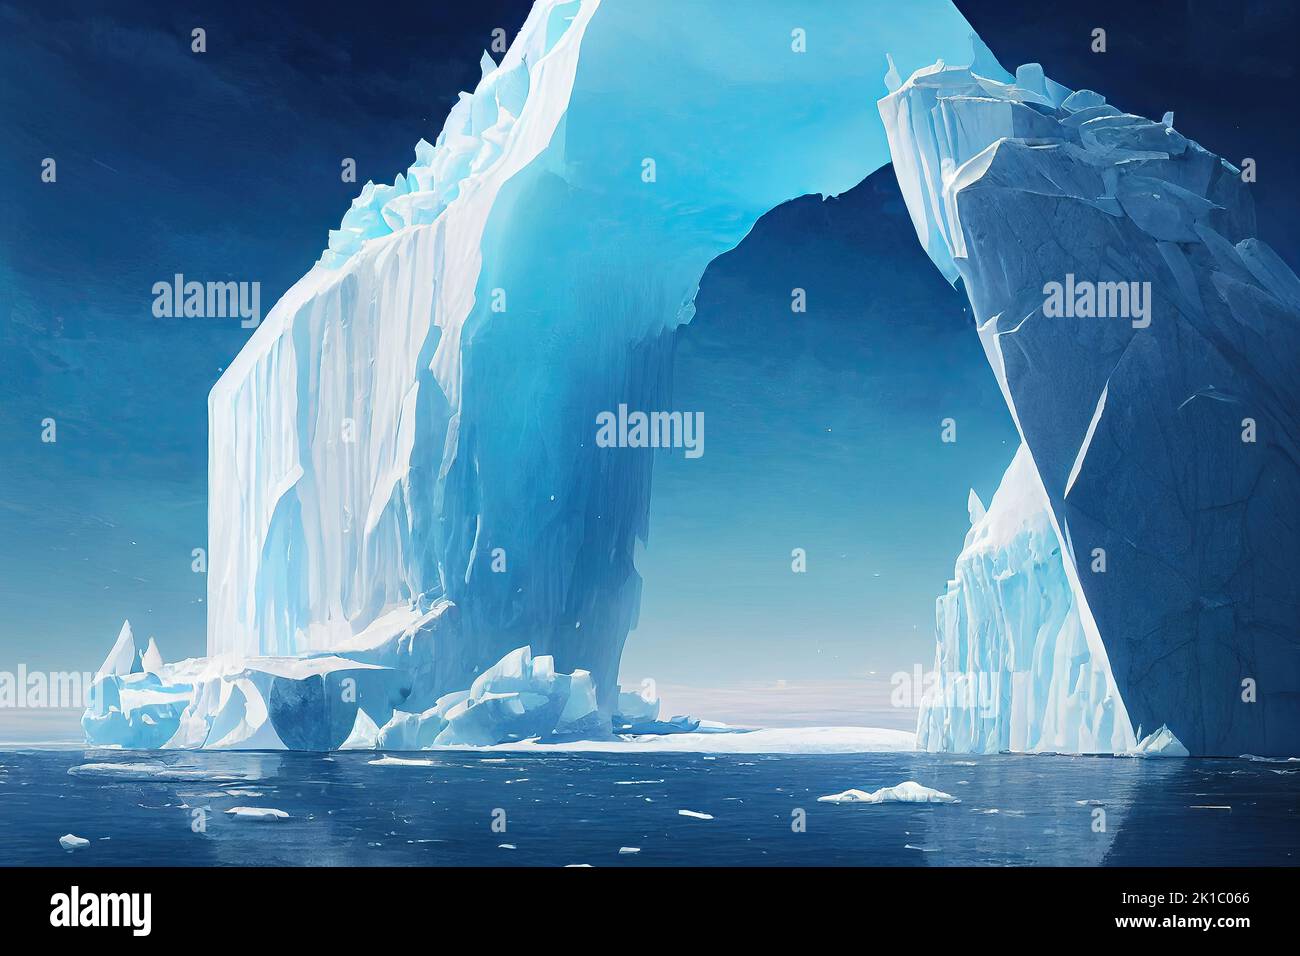 The arctic ocean is experiencing iceberg melting, a visual representation of the concept of global warming and climate change. 3D illustration and Stock Photo